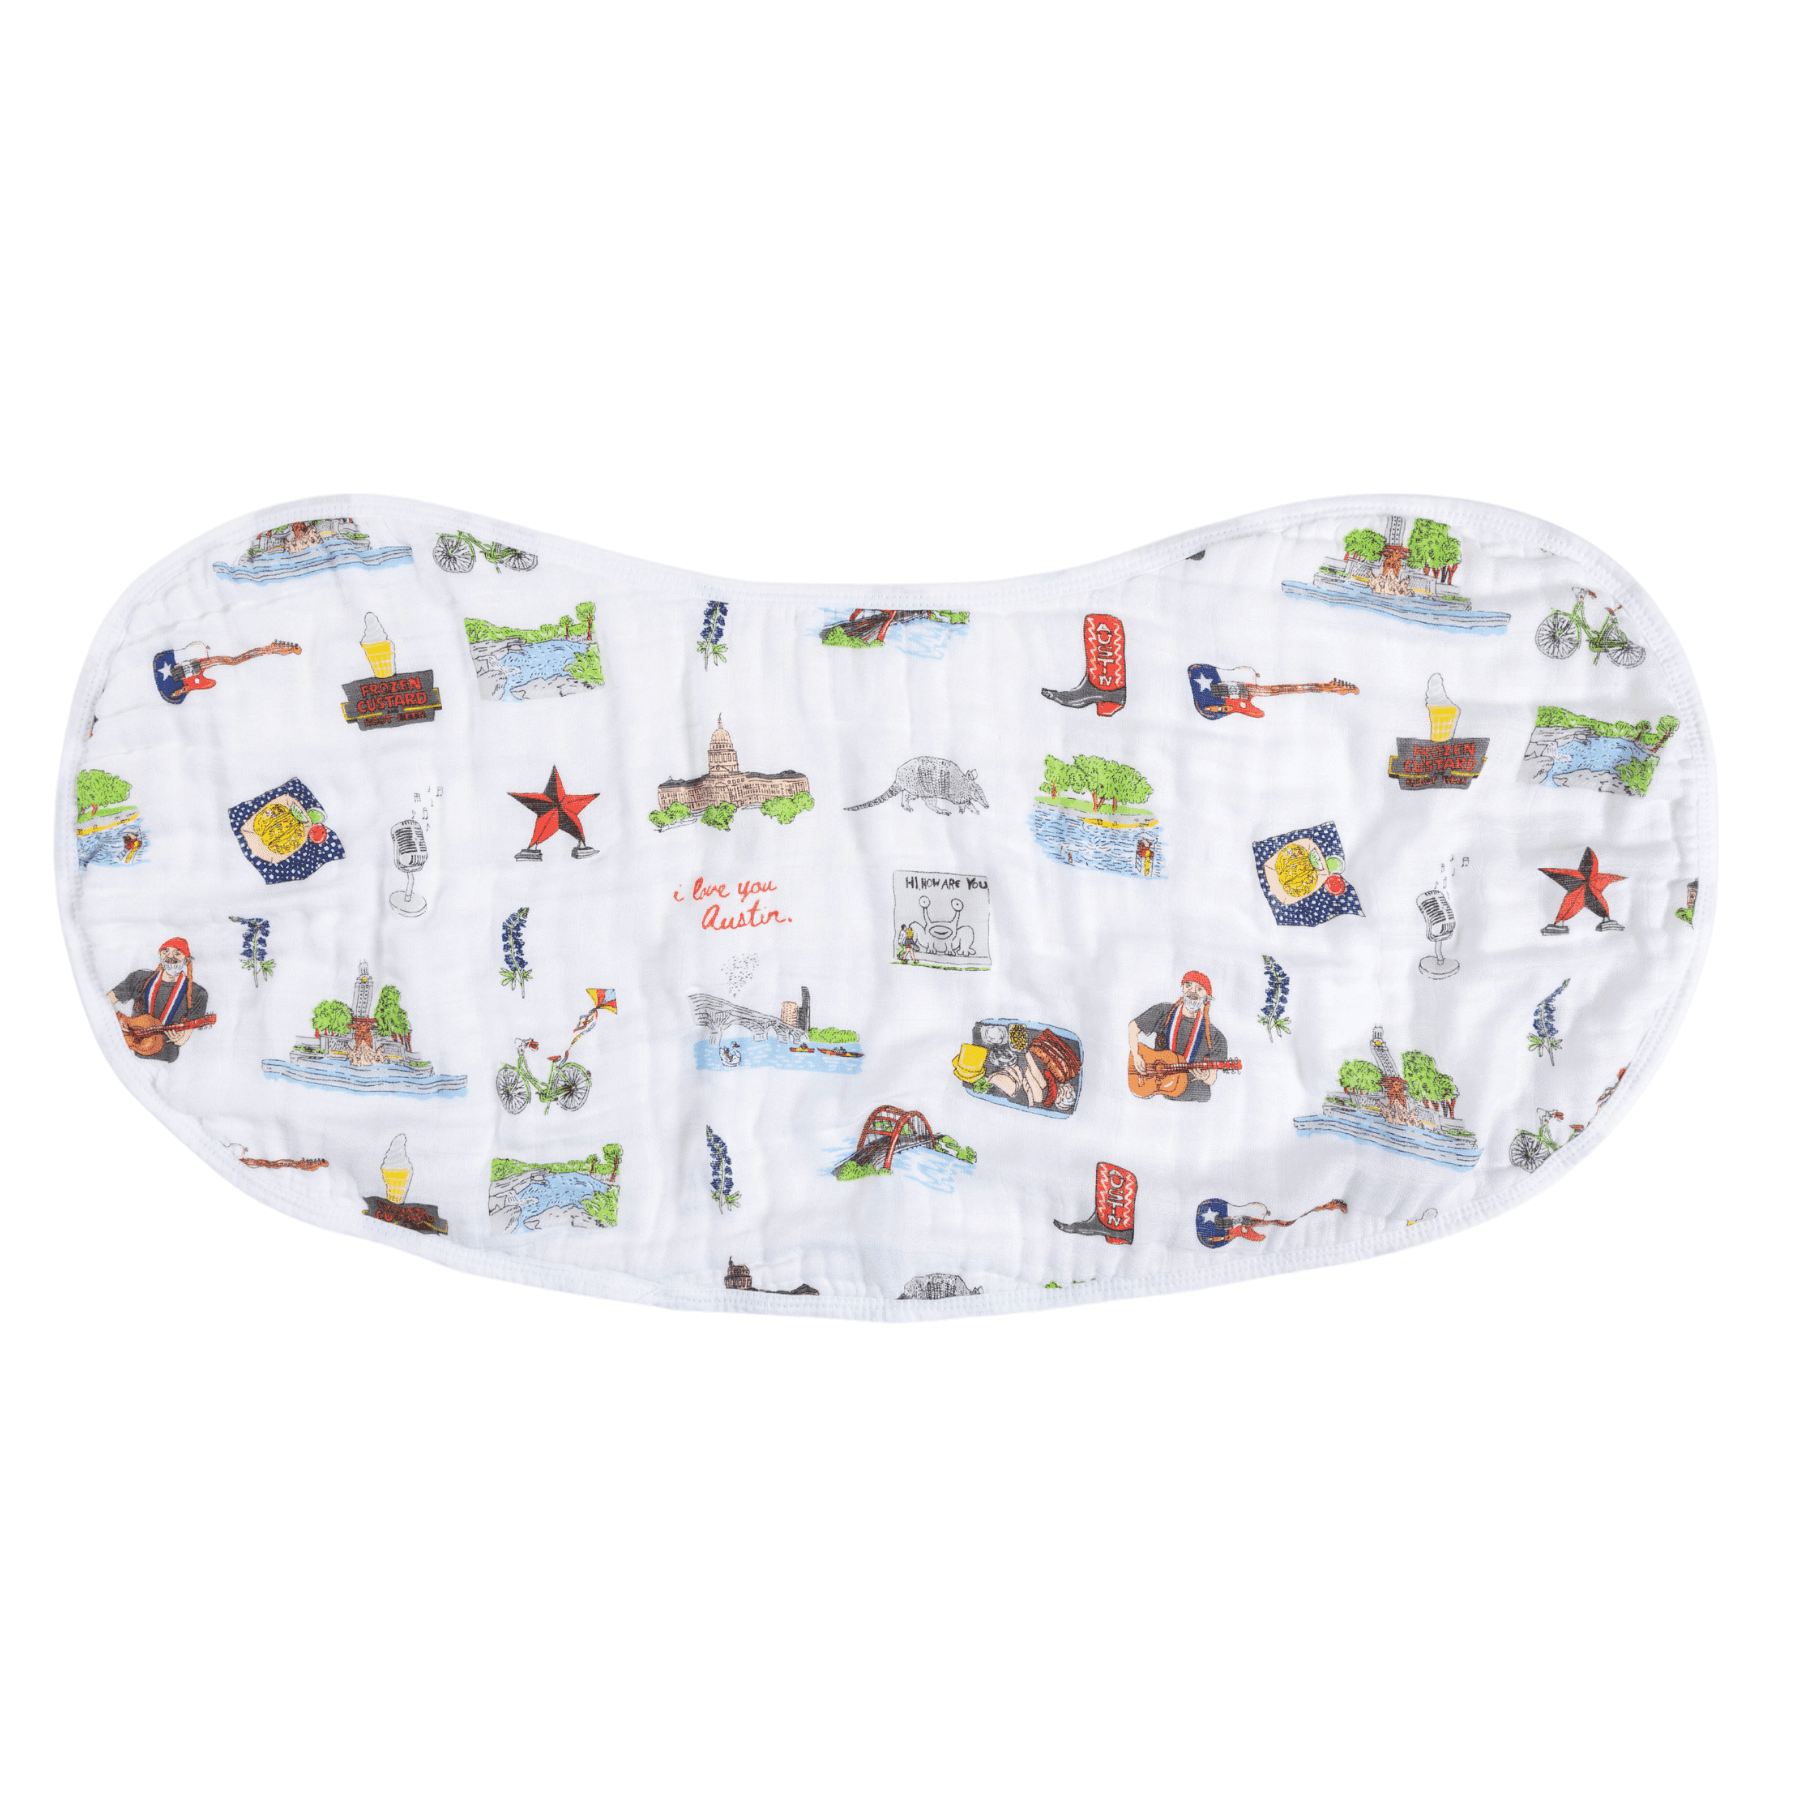 Austin-themed baby gift set with muslin swaddle blanket and burp cloth, featuring Texas icons and landmarks.